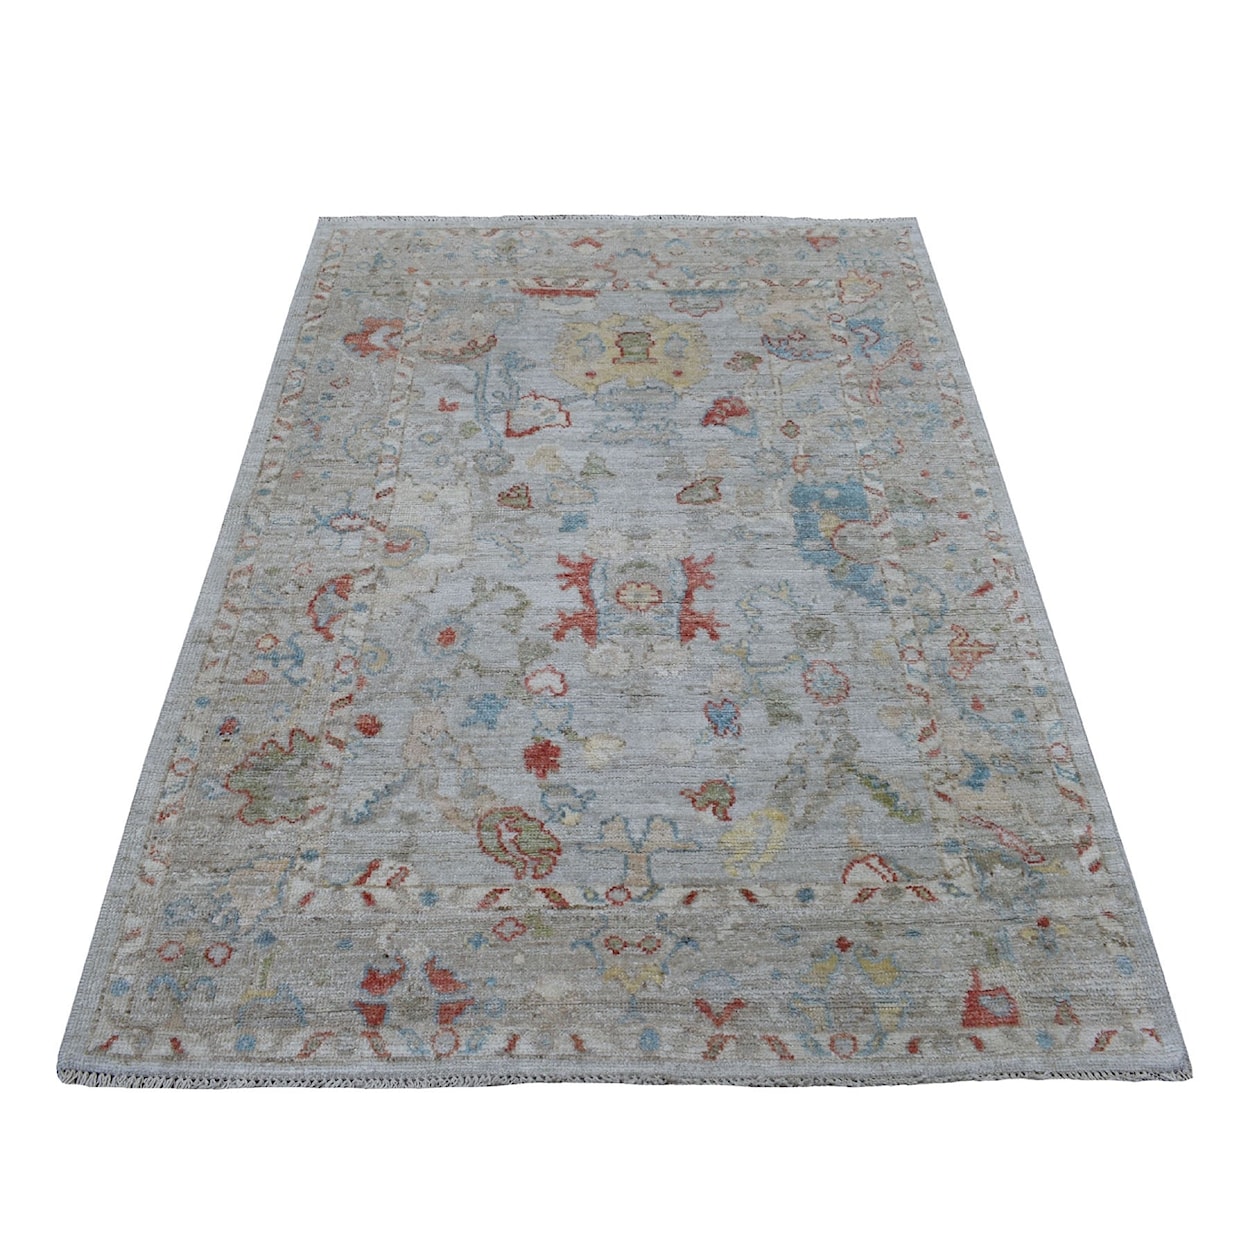 ORC Rugs oushak-and-ziegler-mahal-rugs 4x6  Rug